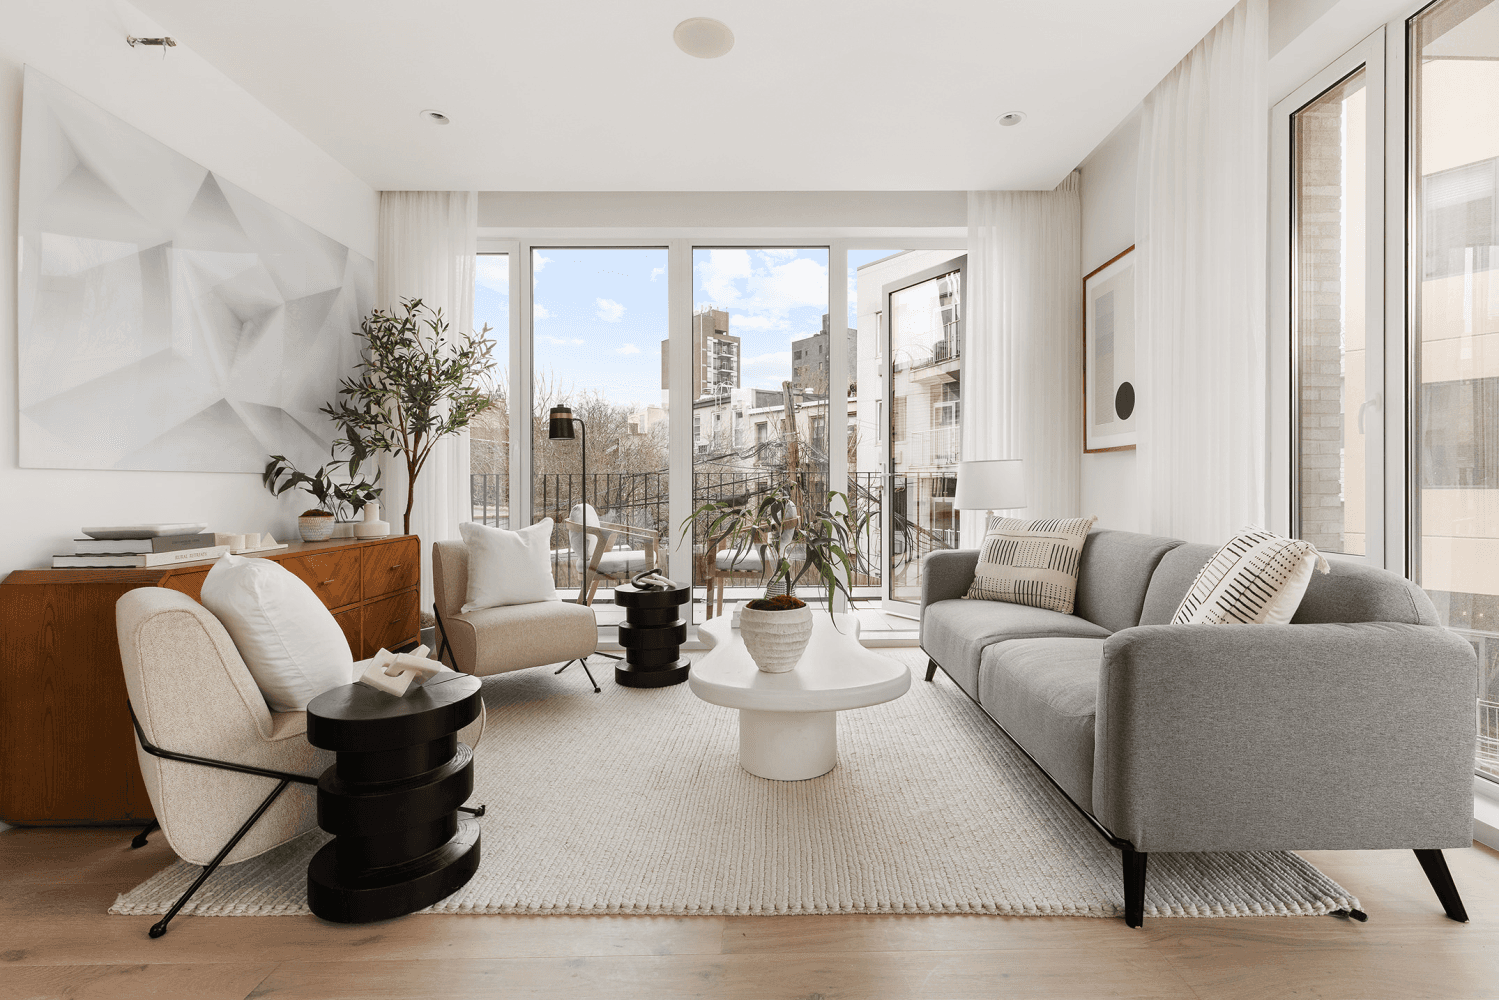 Welcome to this exquisite full floor condo with 3 bedrooms, 2 bathrooms, and a private terrace at The Woodpoint in Williamsburg.